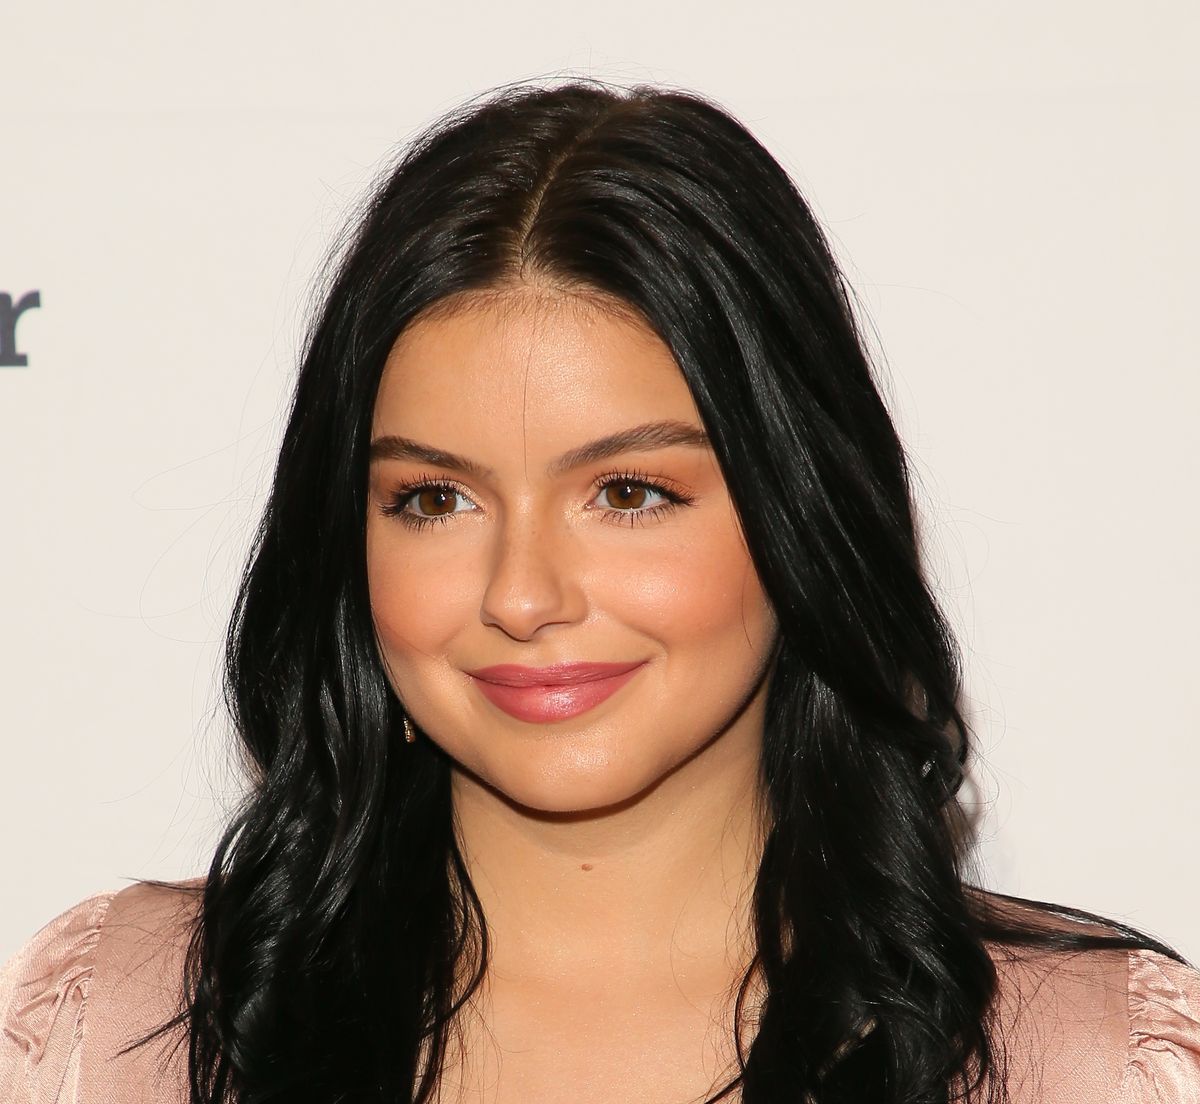 Ariel Winter Porn Real - Ariel Winter Responds To Weight Loss Body-Shaming From Fans